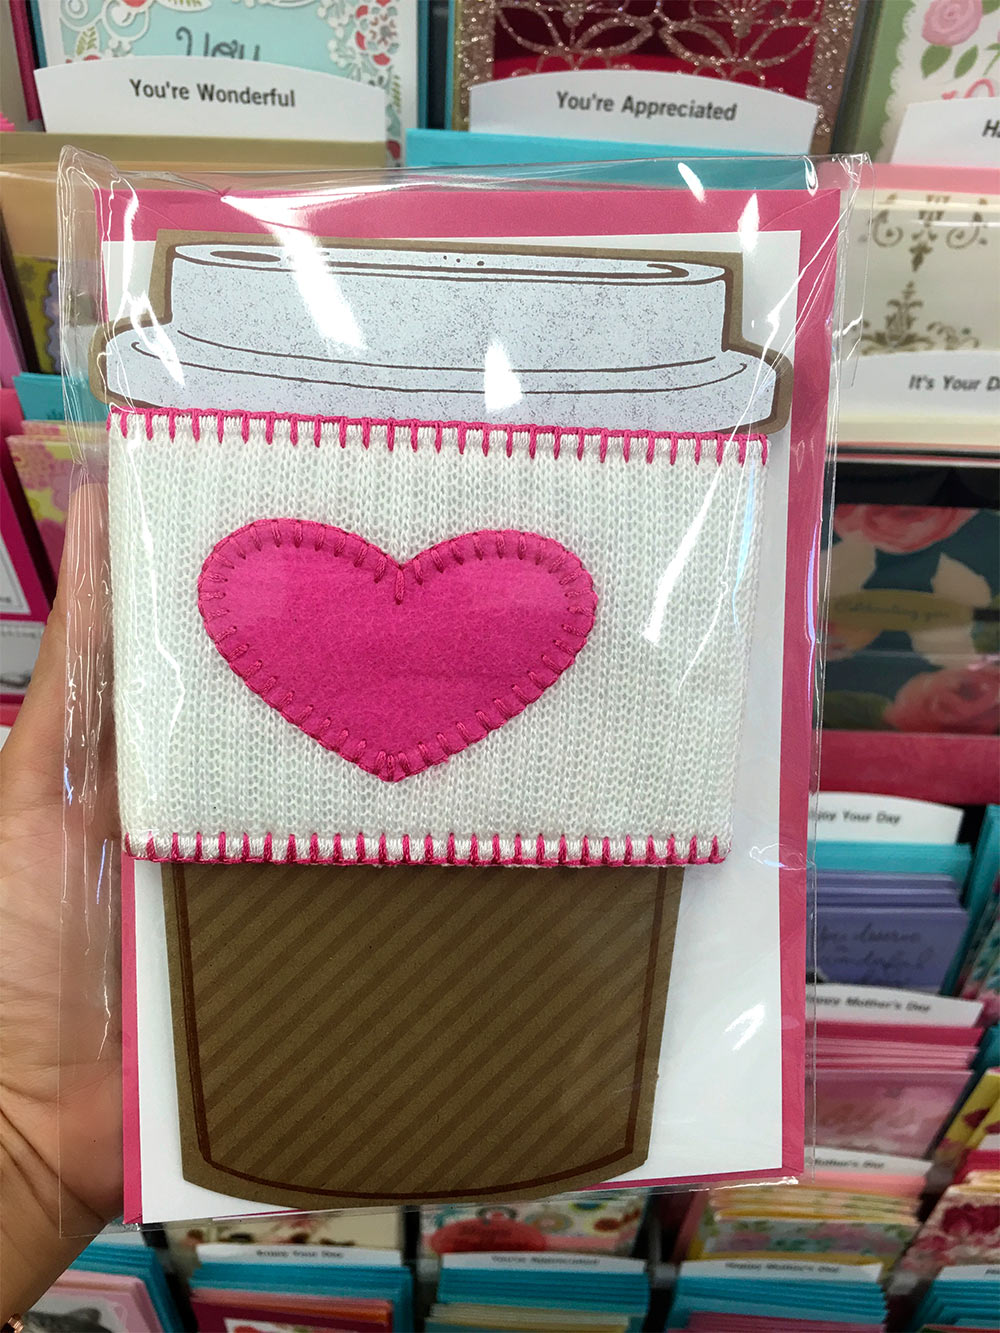 Love this coffee cozy with a heart